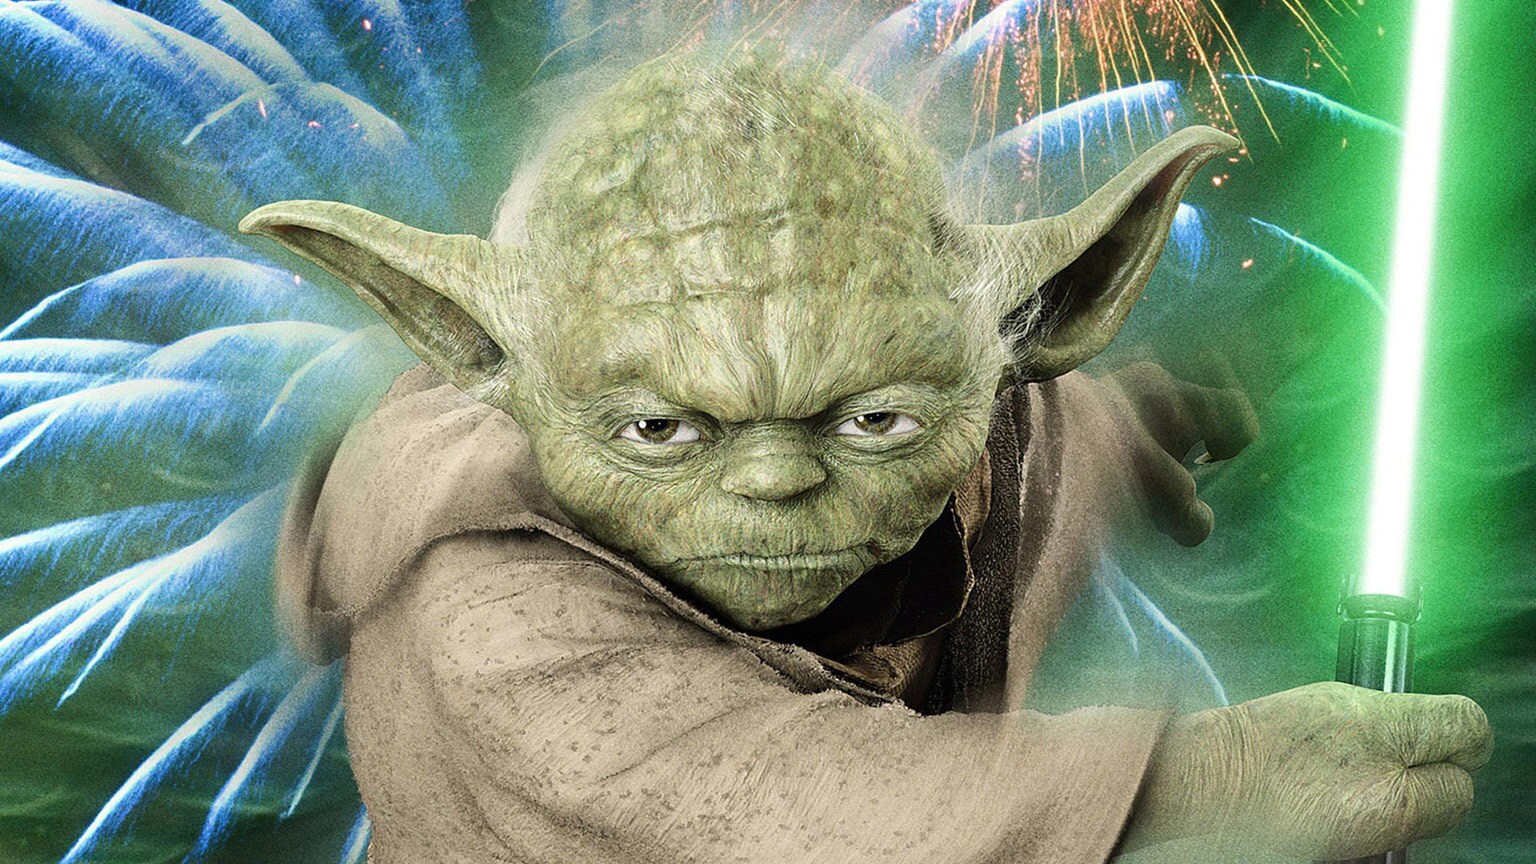 A May the 4th poster wirth Yoda promoting the holiday and Episode III